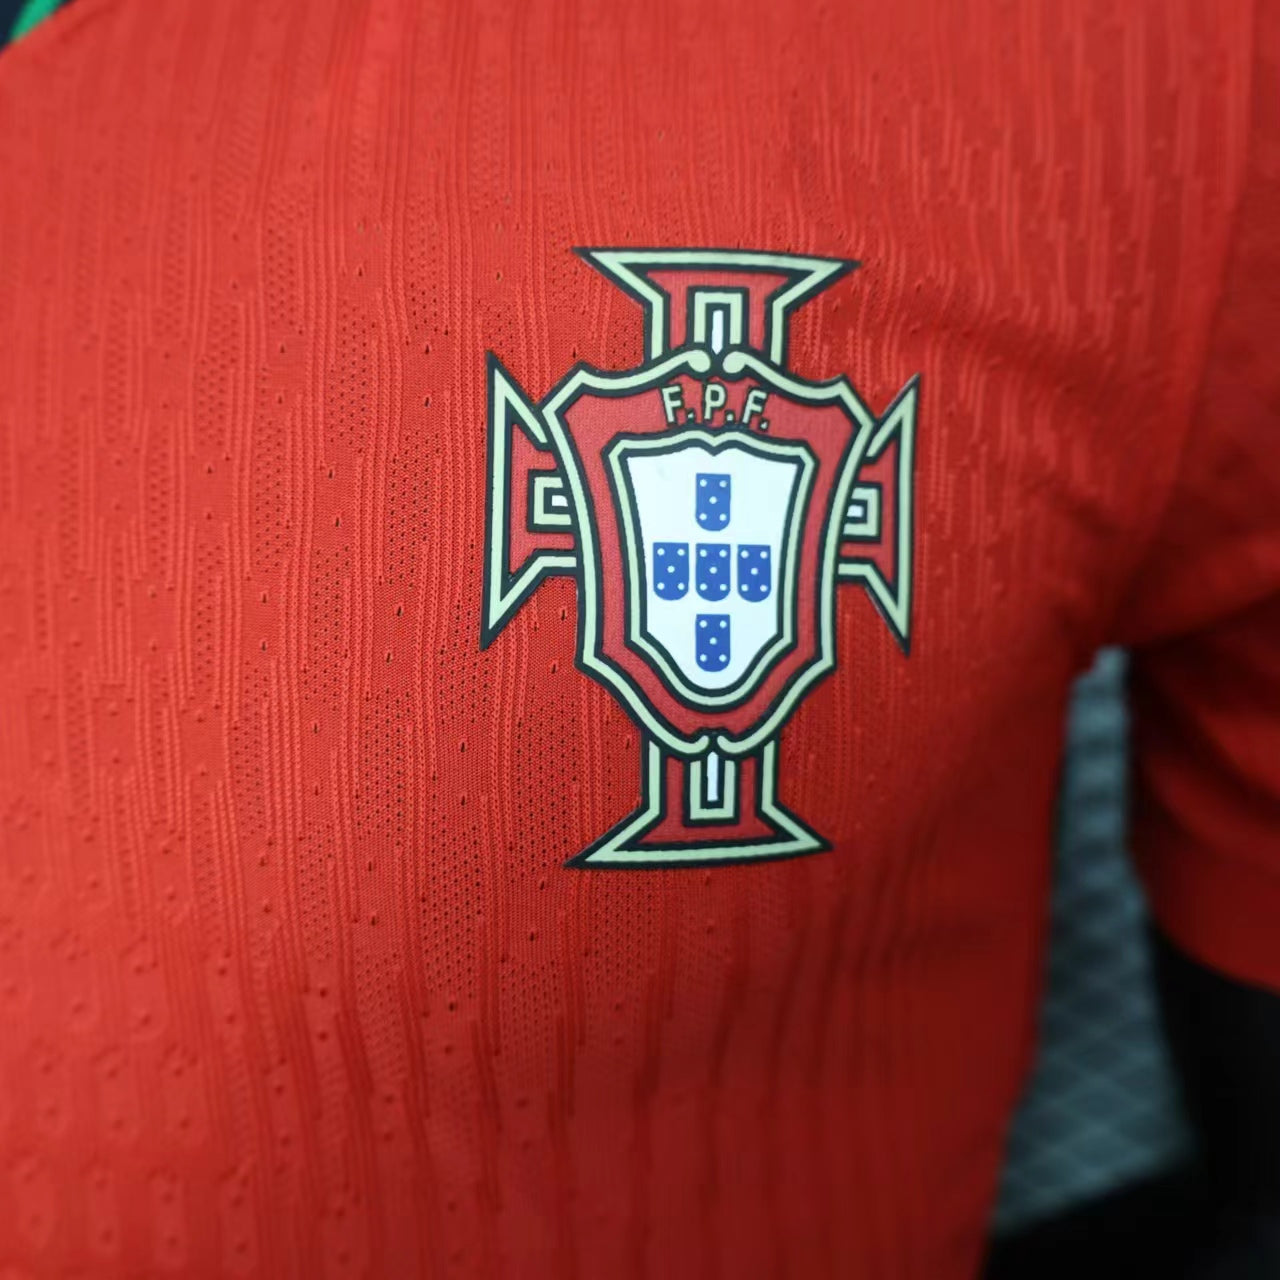 Portugal EURO 2024 Home kit – Player Version